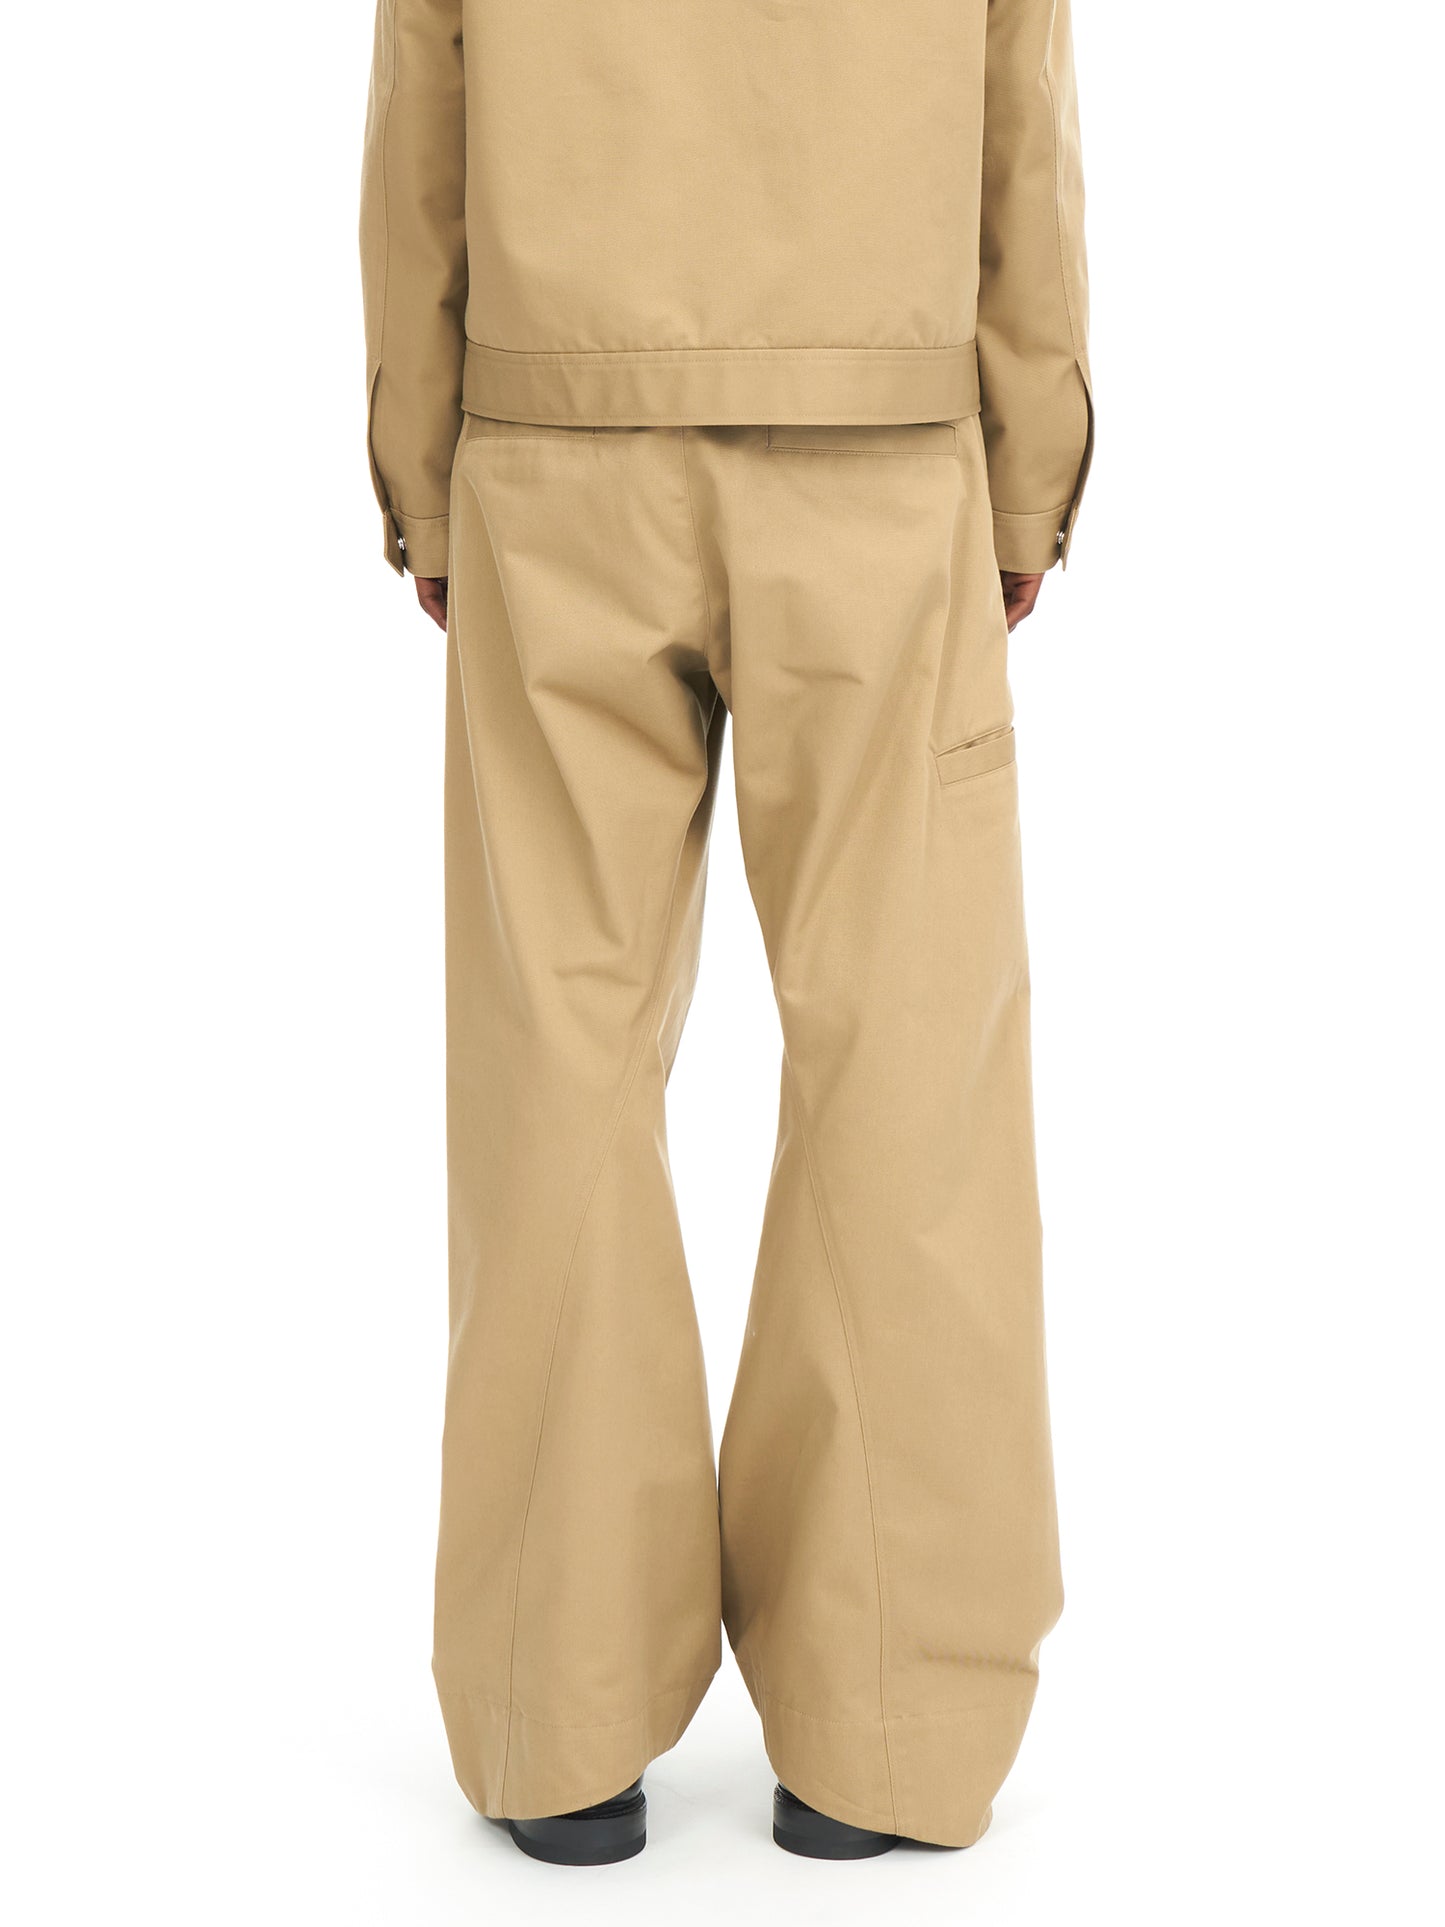 TWISTED WORK PANTS (23aw) #BEIGE [PT-01-0002]